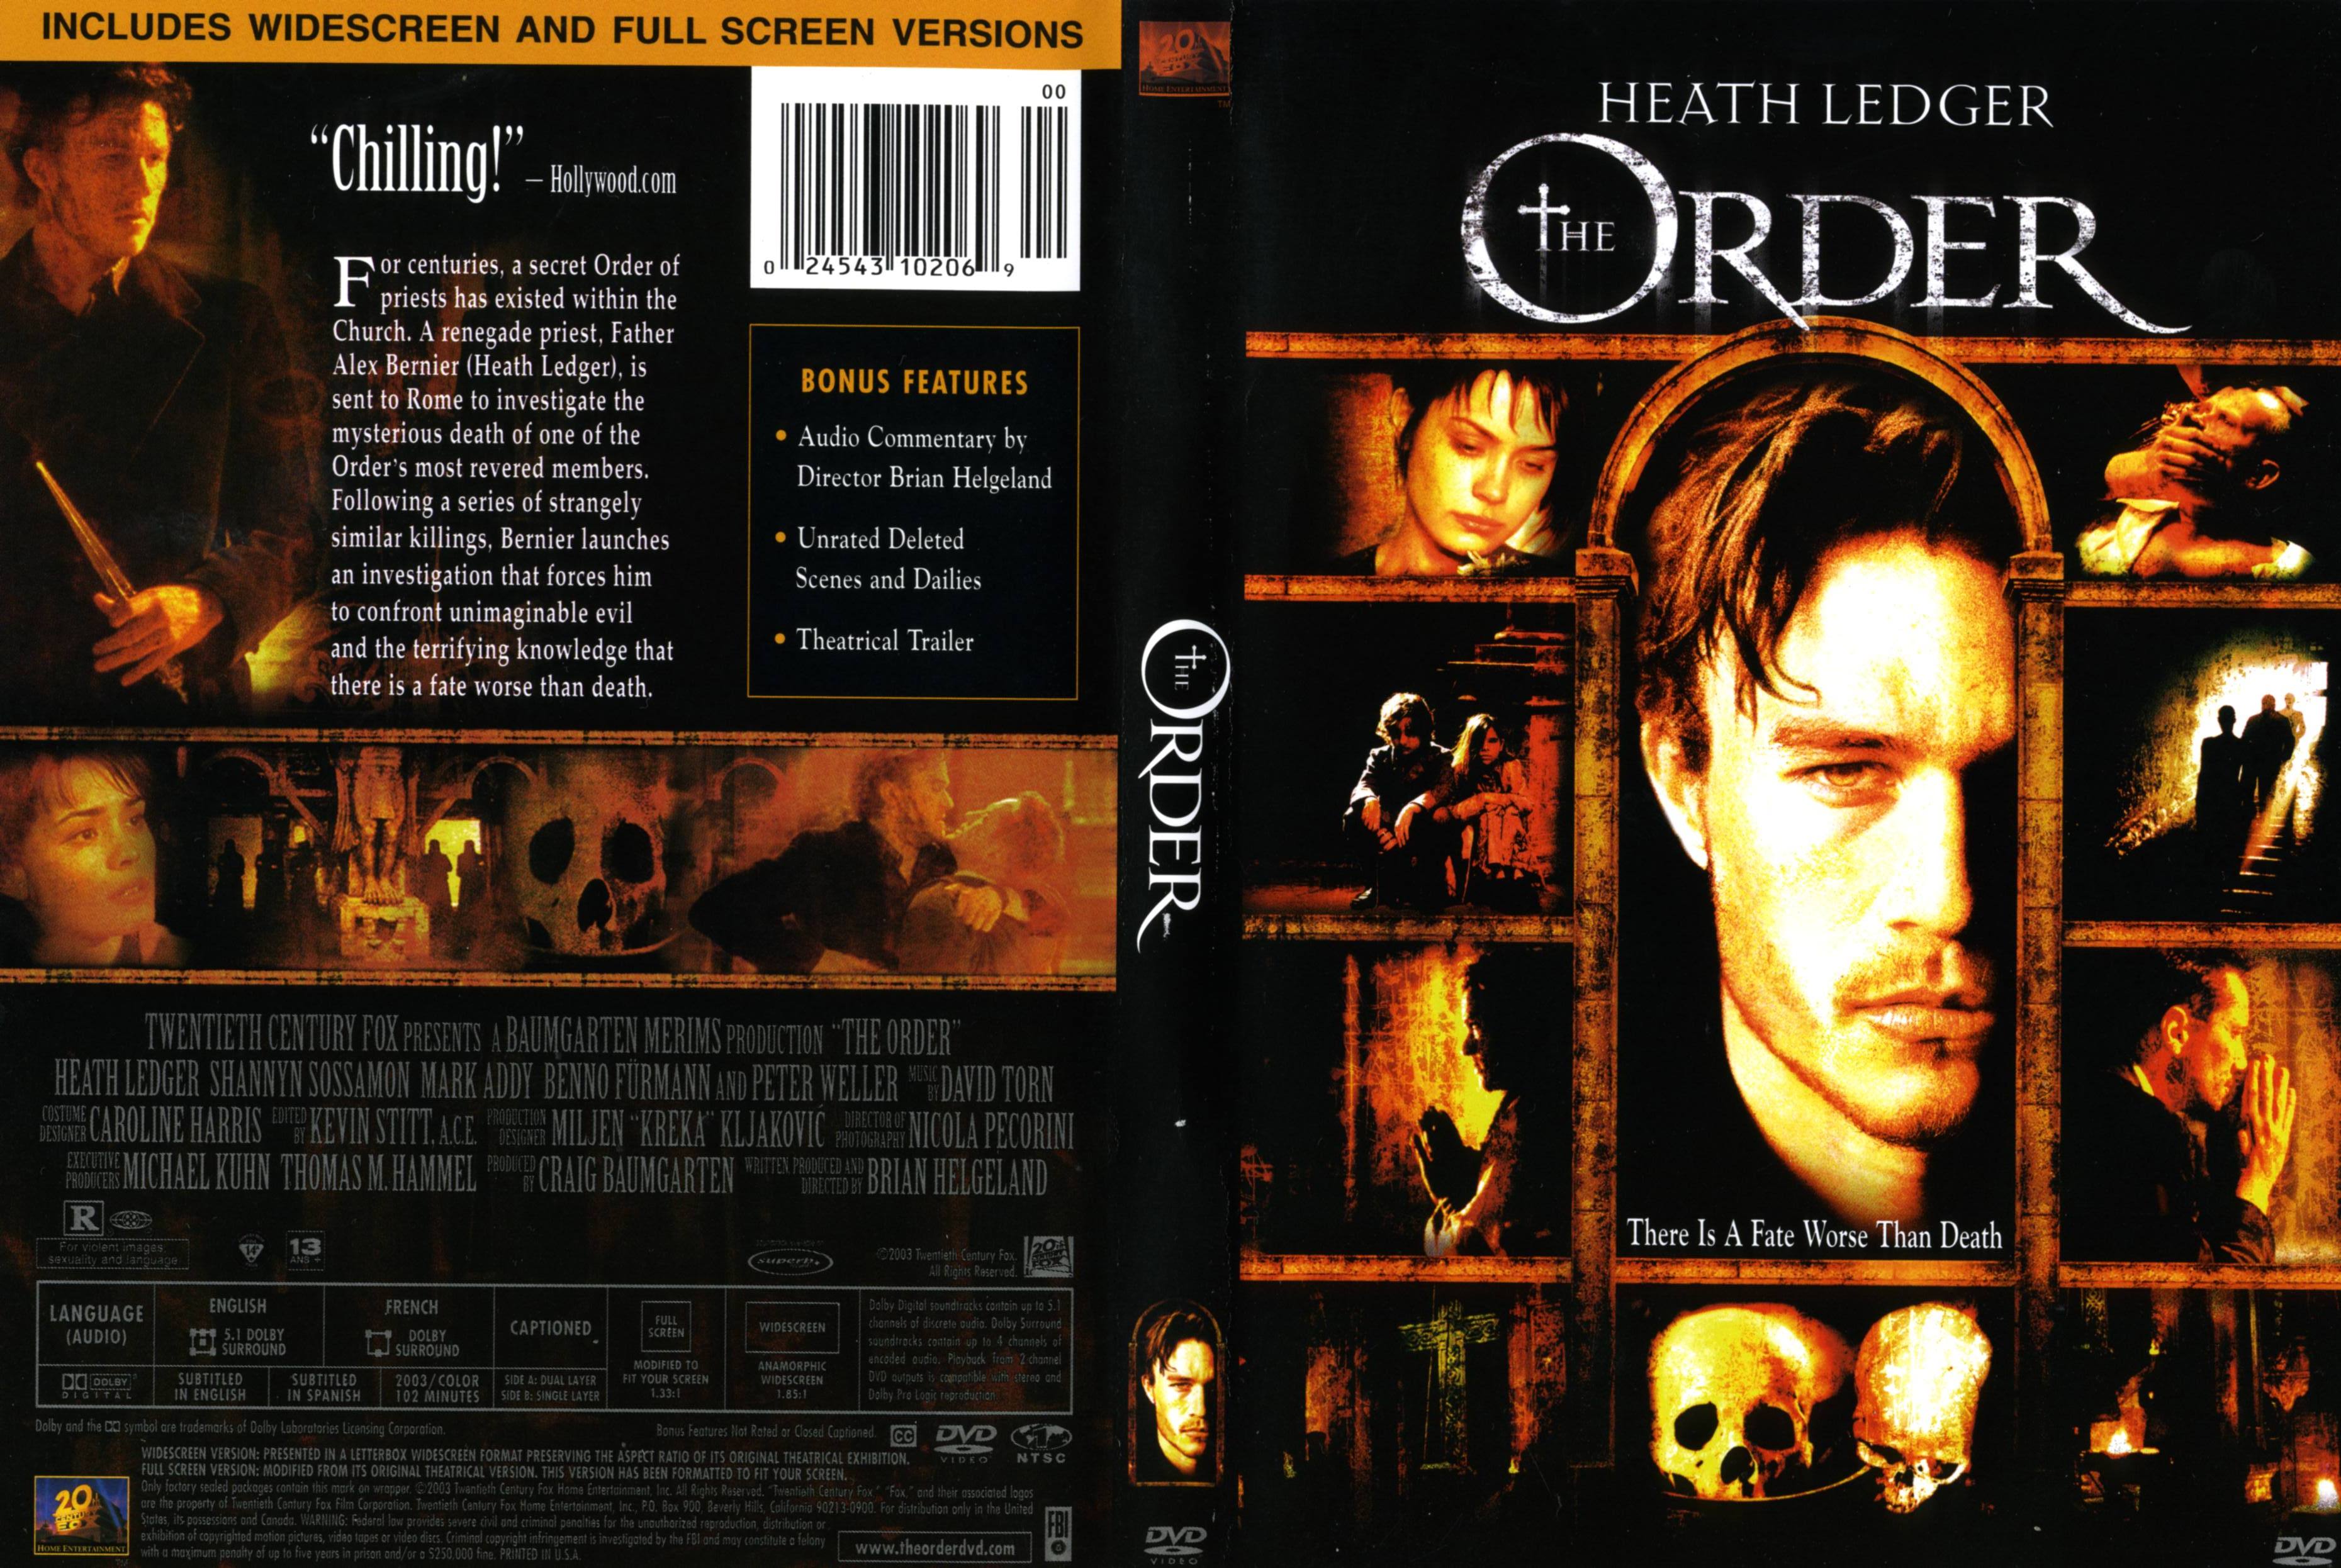 Jaquette DVD The order Zone 1